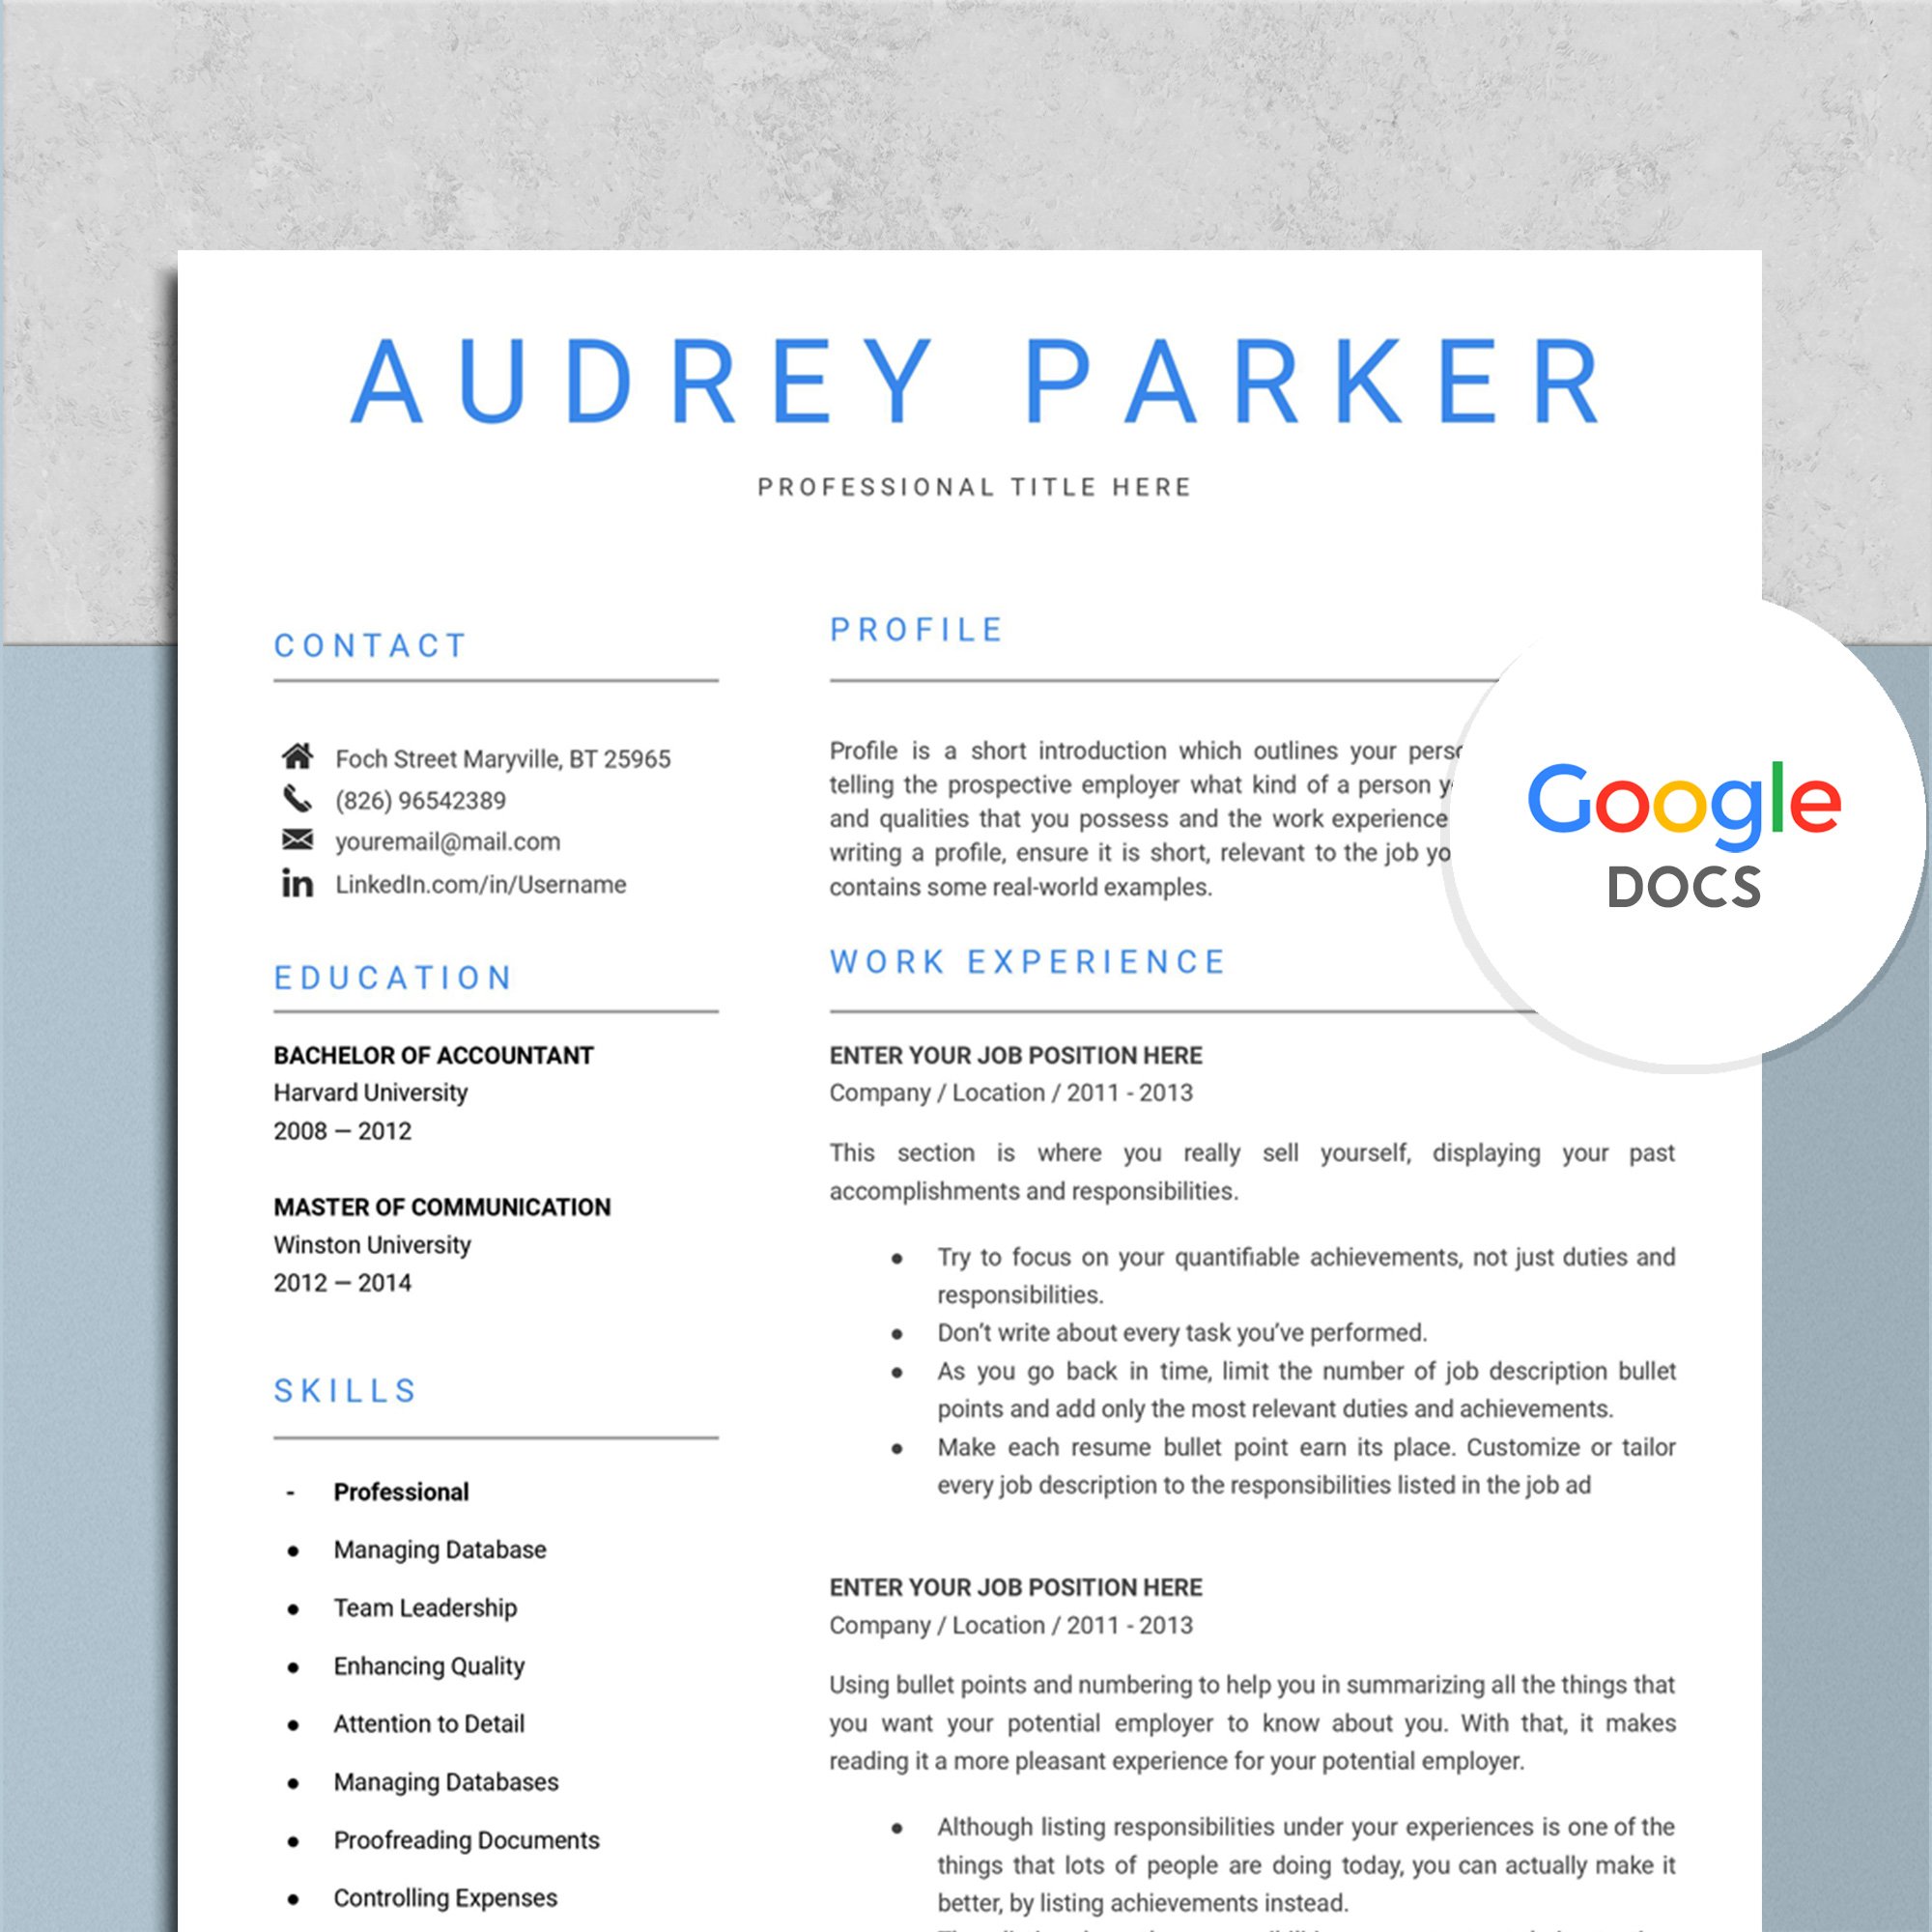 Professional Google Docs Resume preview image.